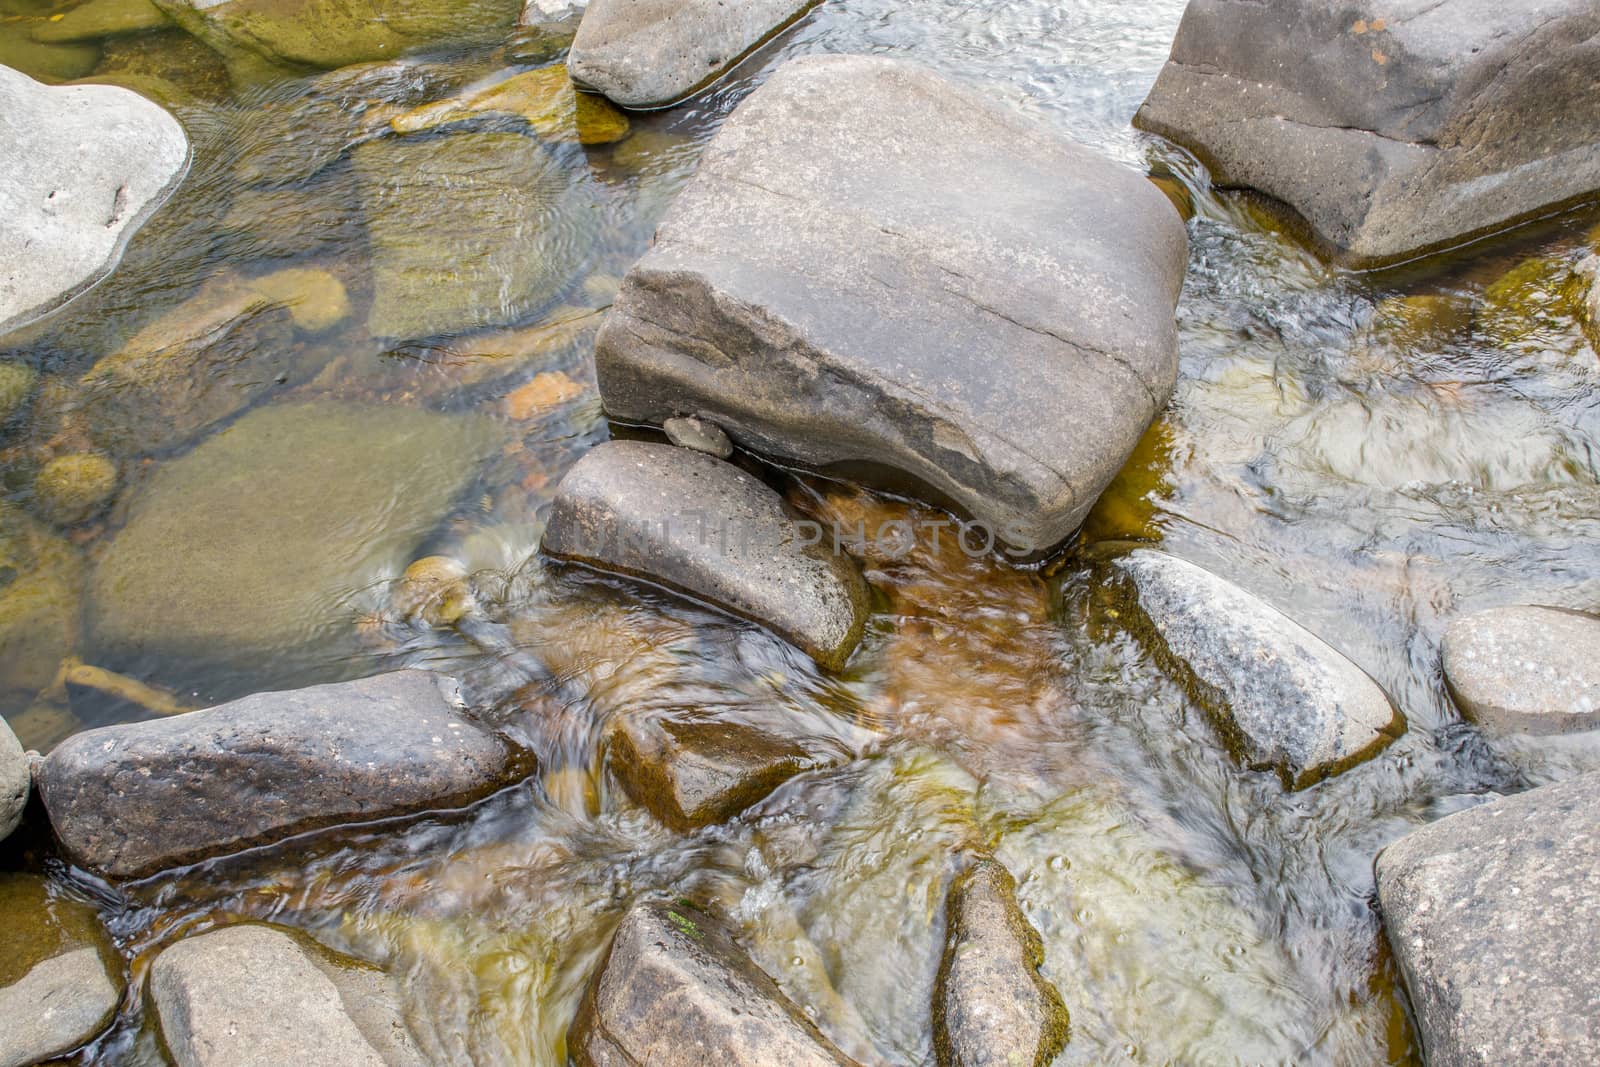 Small rocks in the Mitchell river in Gippsland, Victoria. water flowing around them.